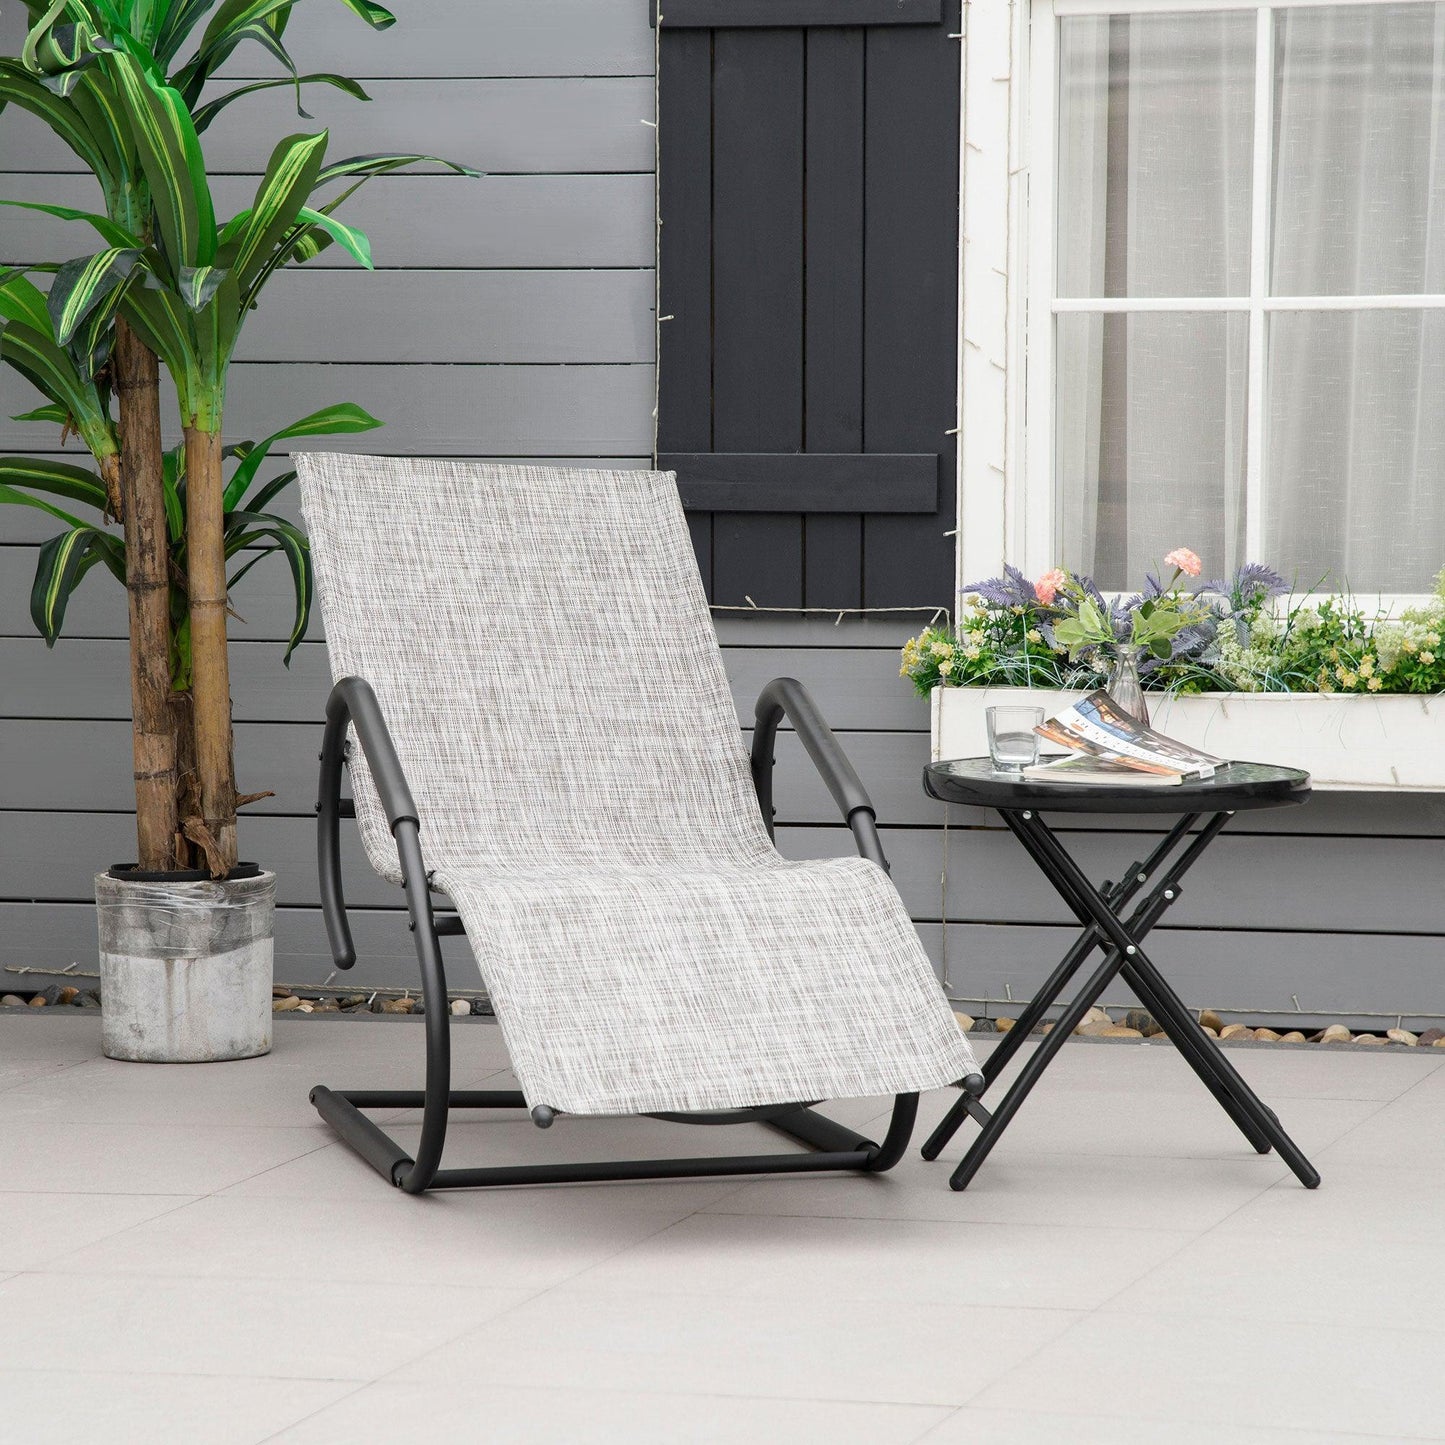 Outsunny Reclining Chaise Lounge Chair - ALL4U RETAILER LTD